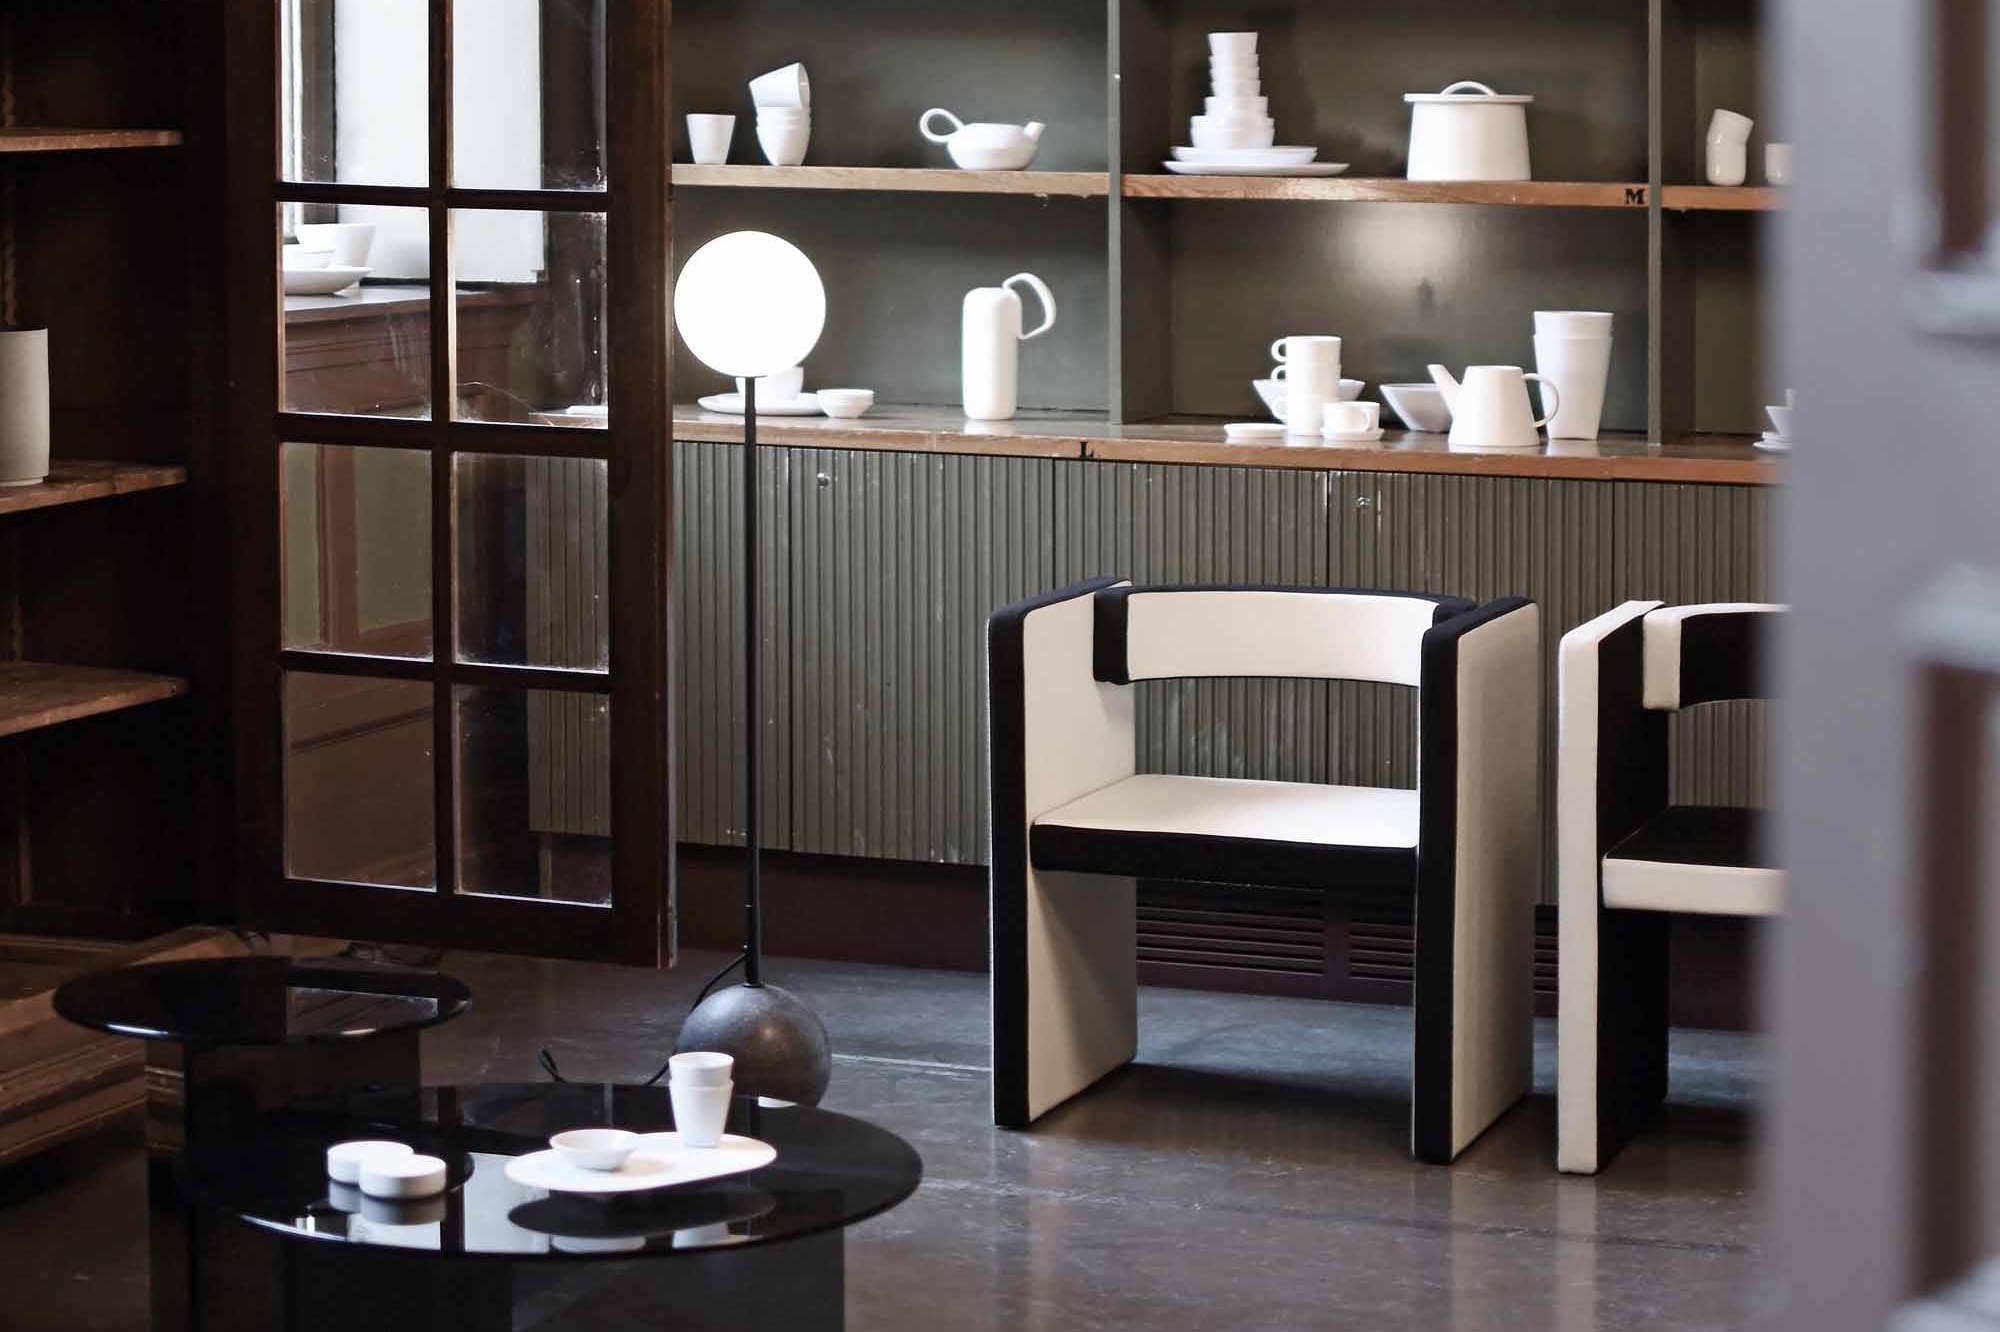 The Archive - a showcase of Japanese & Scandinavian design | These Four Walls blog